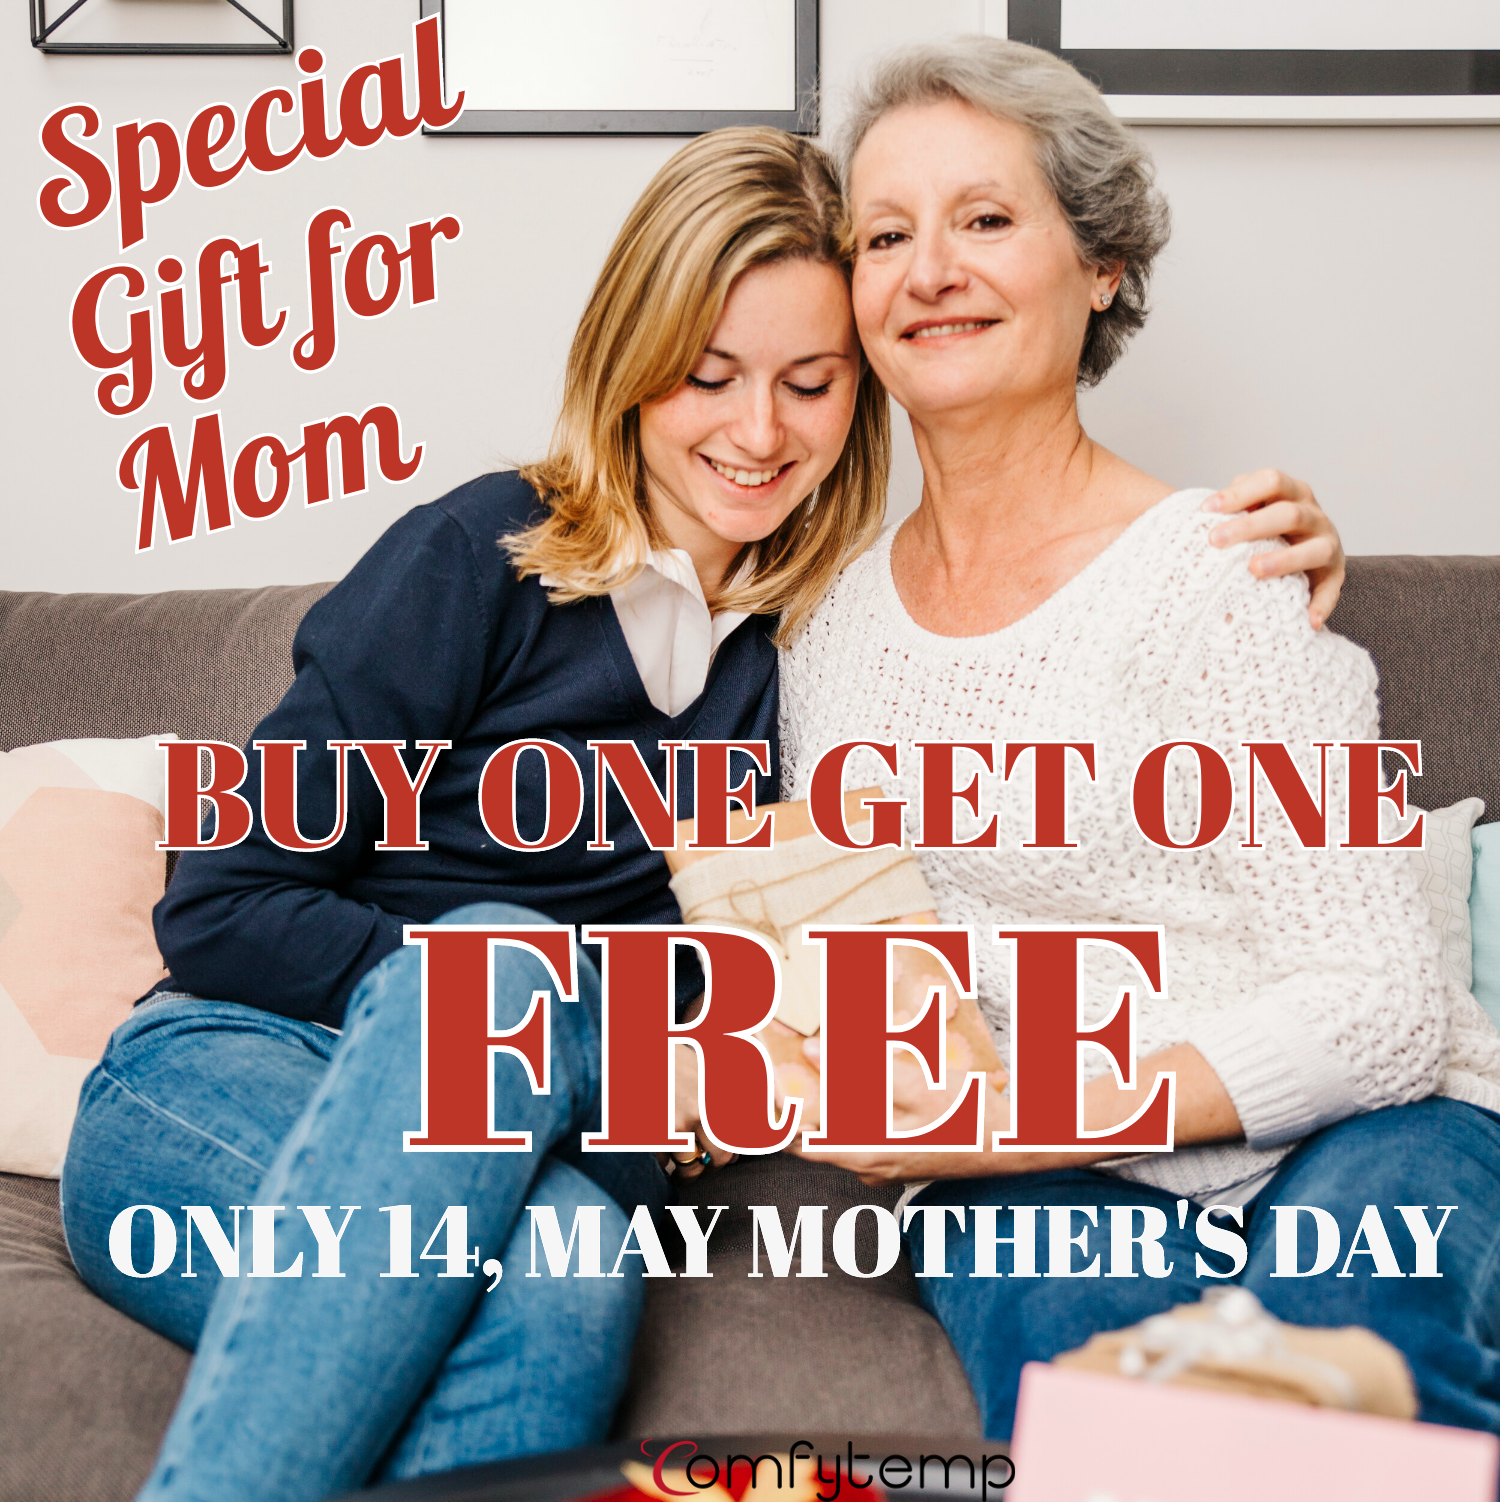 EXCLUSIVE MOTHER'S DAY